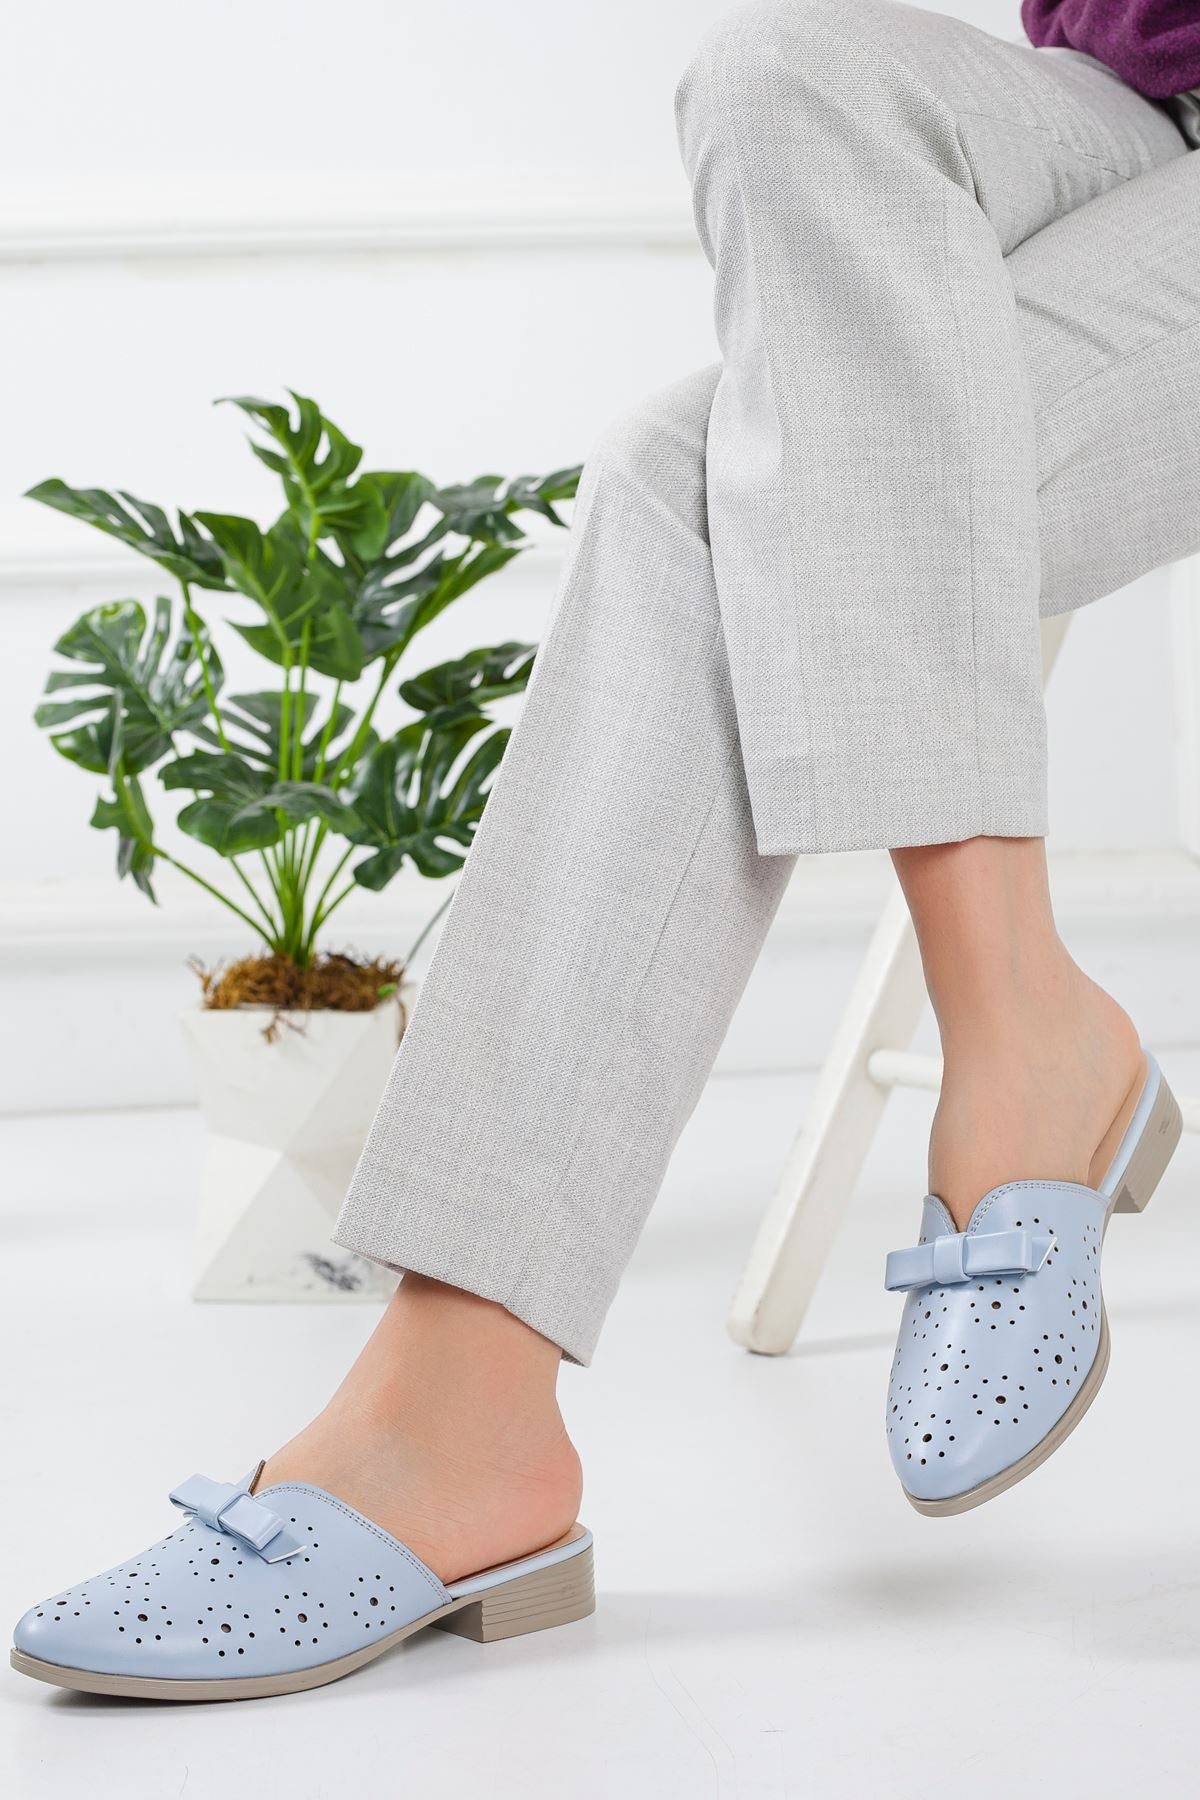 Image of Women's Baby Blue Slippers